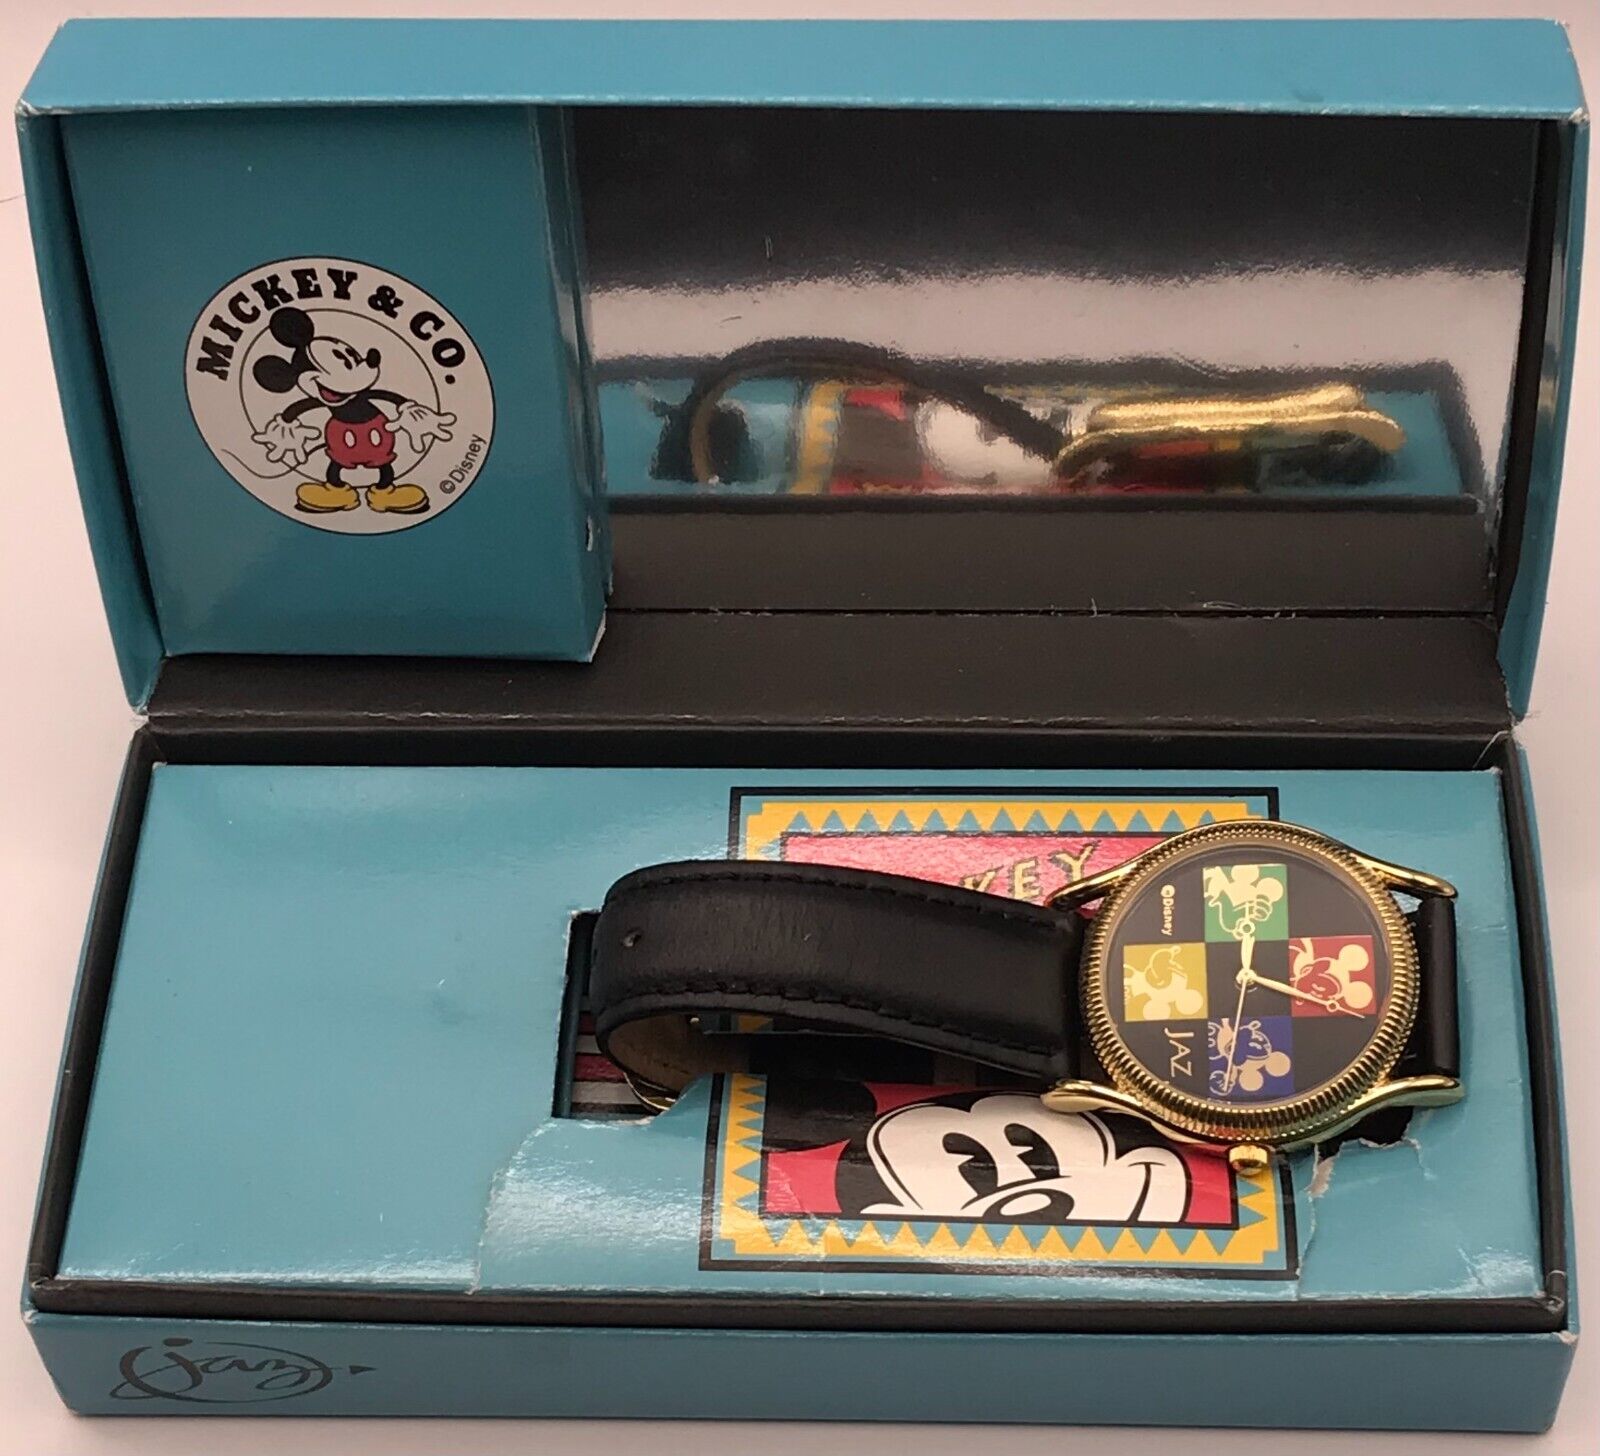 NOS NEW IN BOX Mickey Mouse by Seiko Jaz Disney Collectable Watch Gold Color